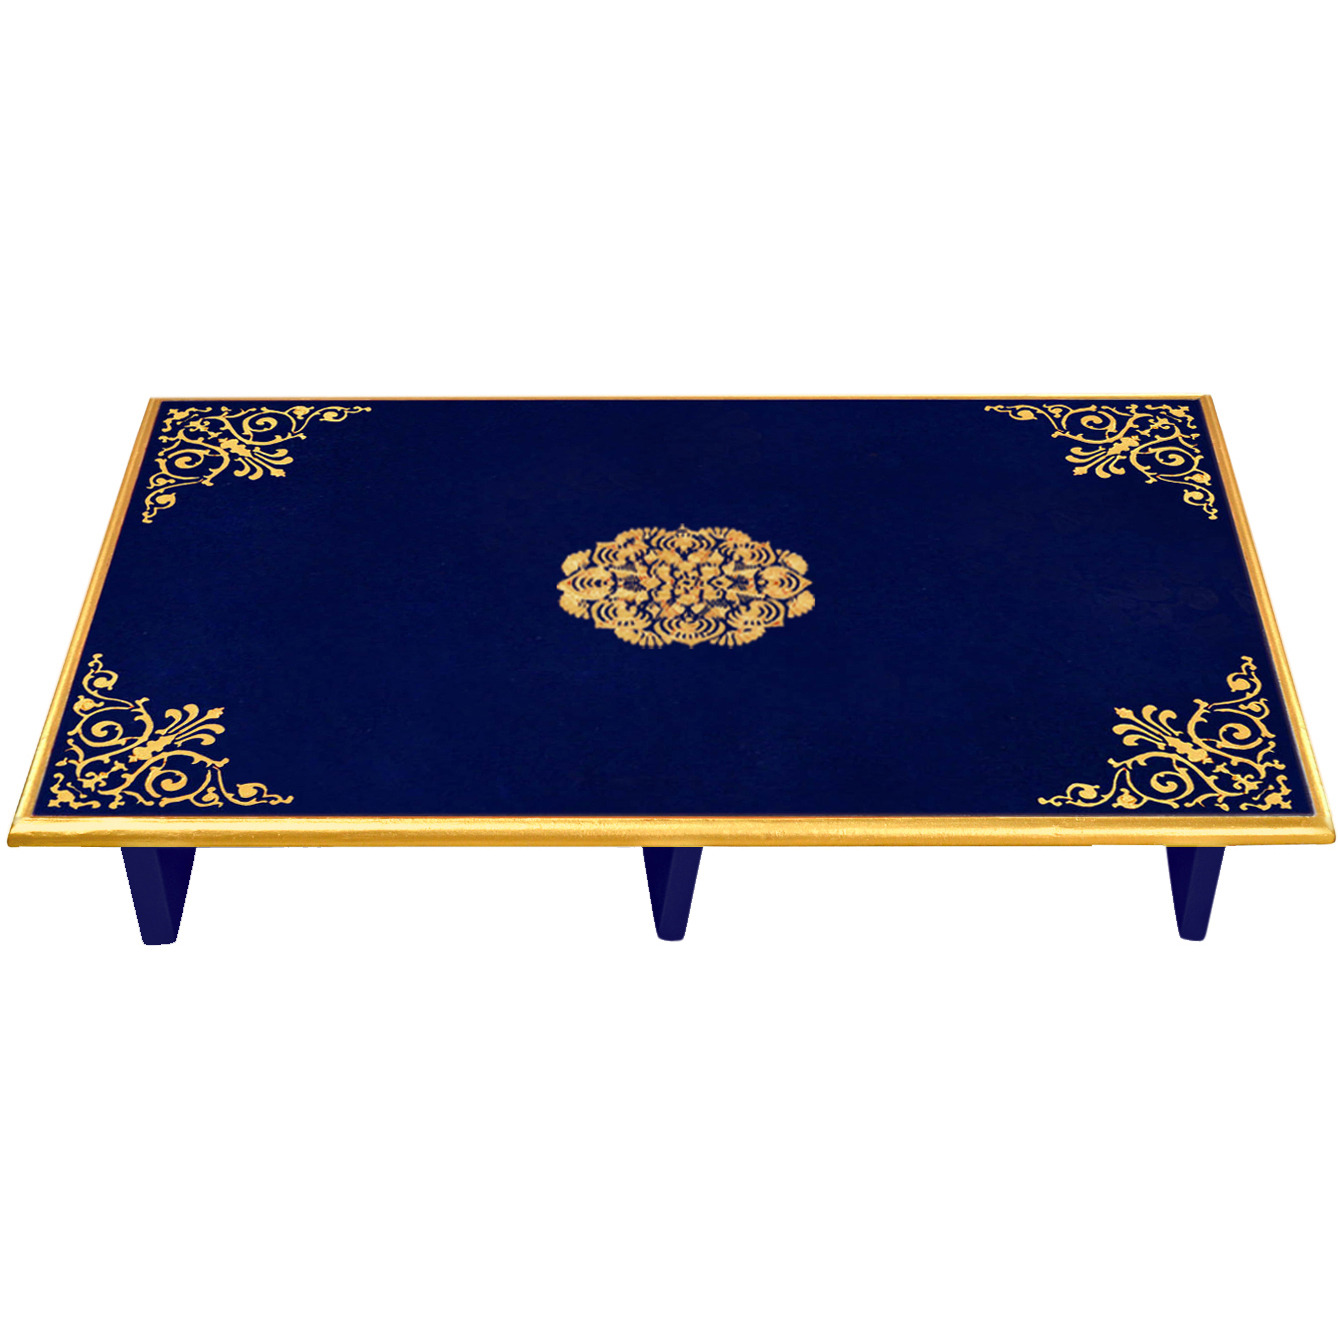 Chowki for Home D??cor Bedside Corner Table Altar Mediation Stool Coffee Table (24X15X4 Inch) (Size: 24X15X4, Color: Blue)